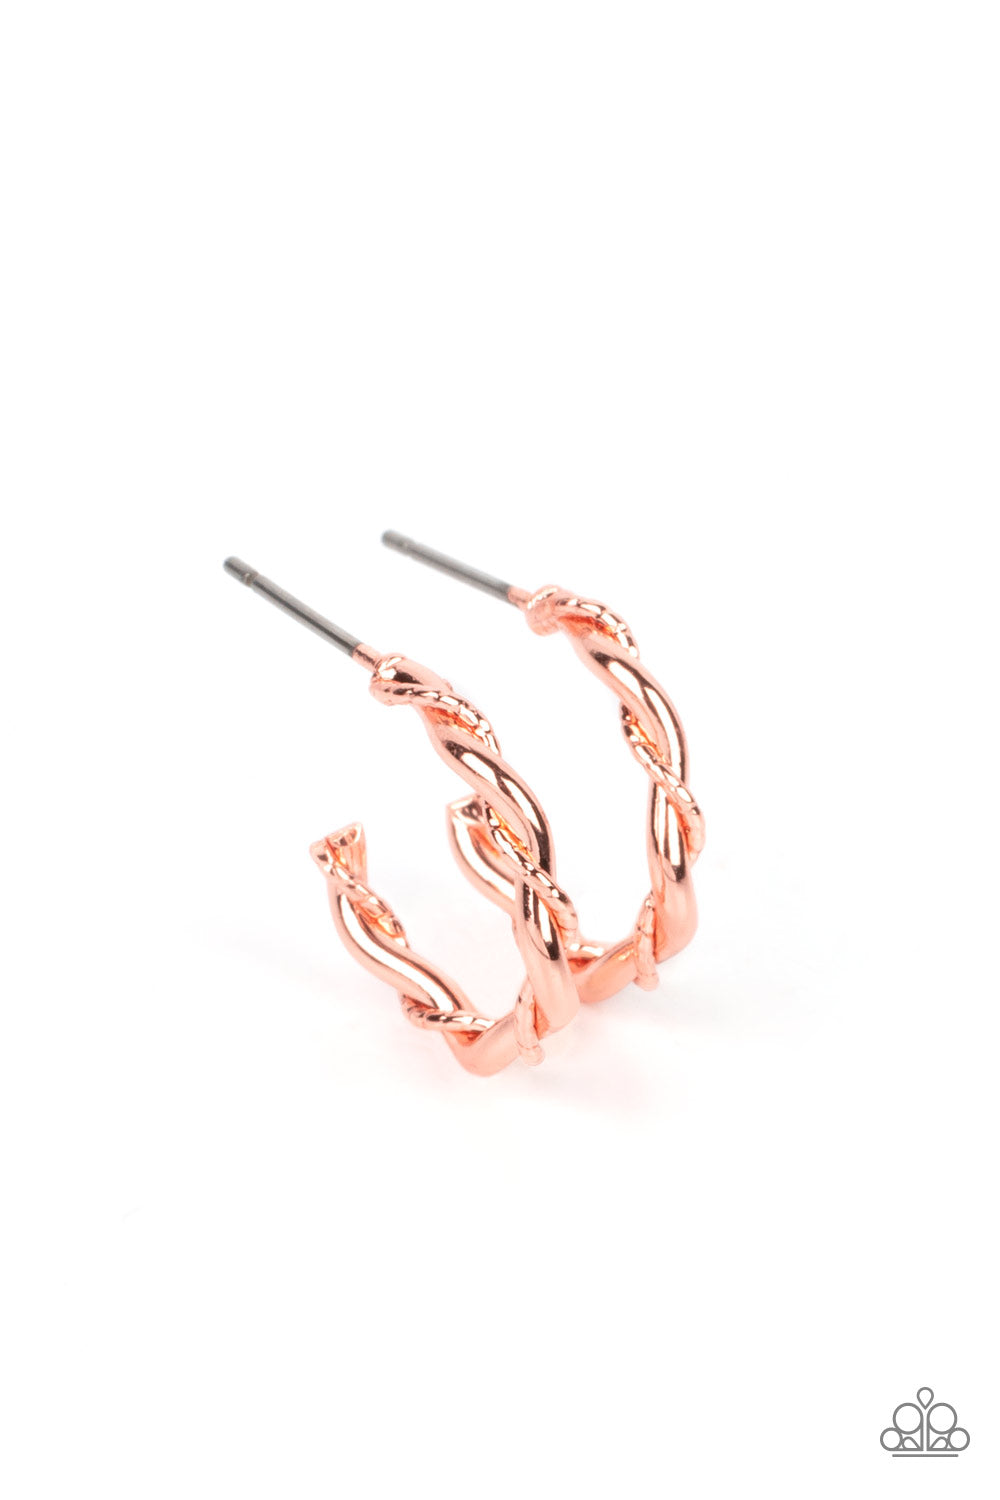 Irresistibly Intertwined - Copper Mini Hoops